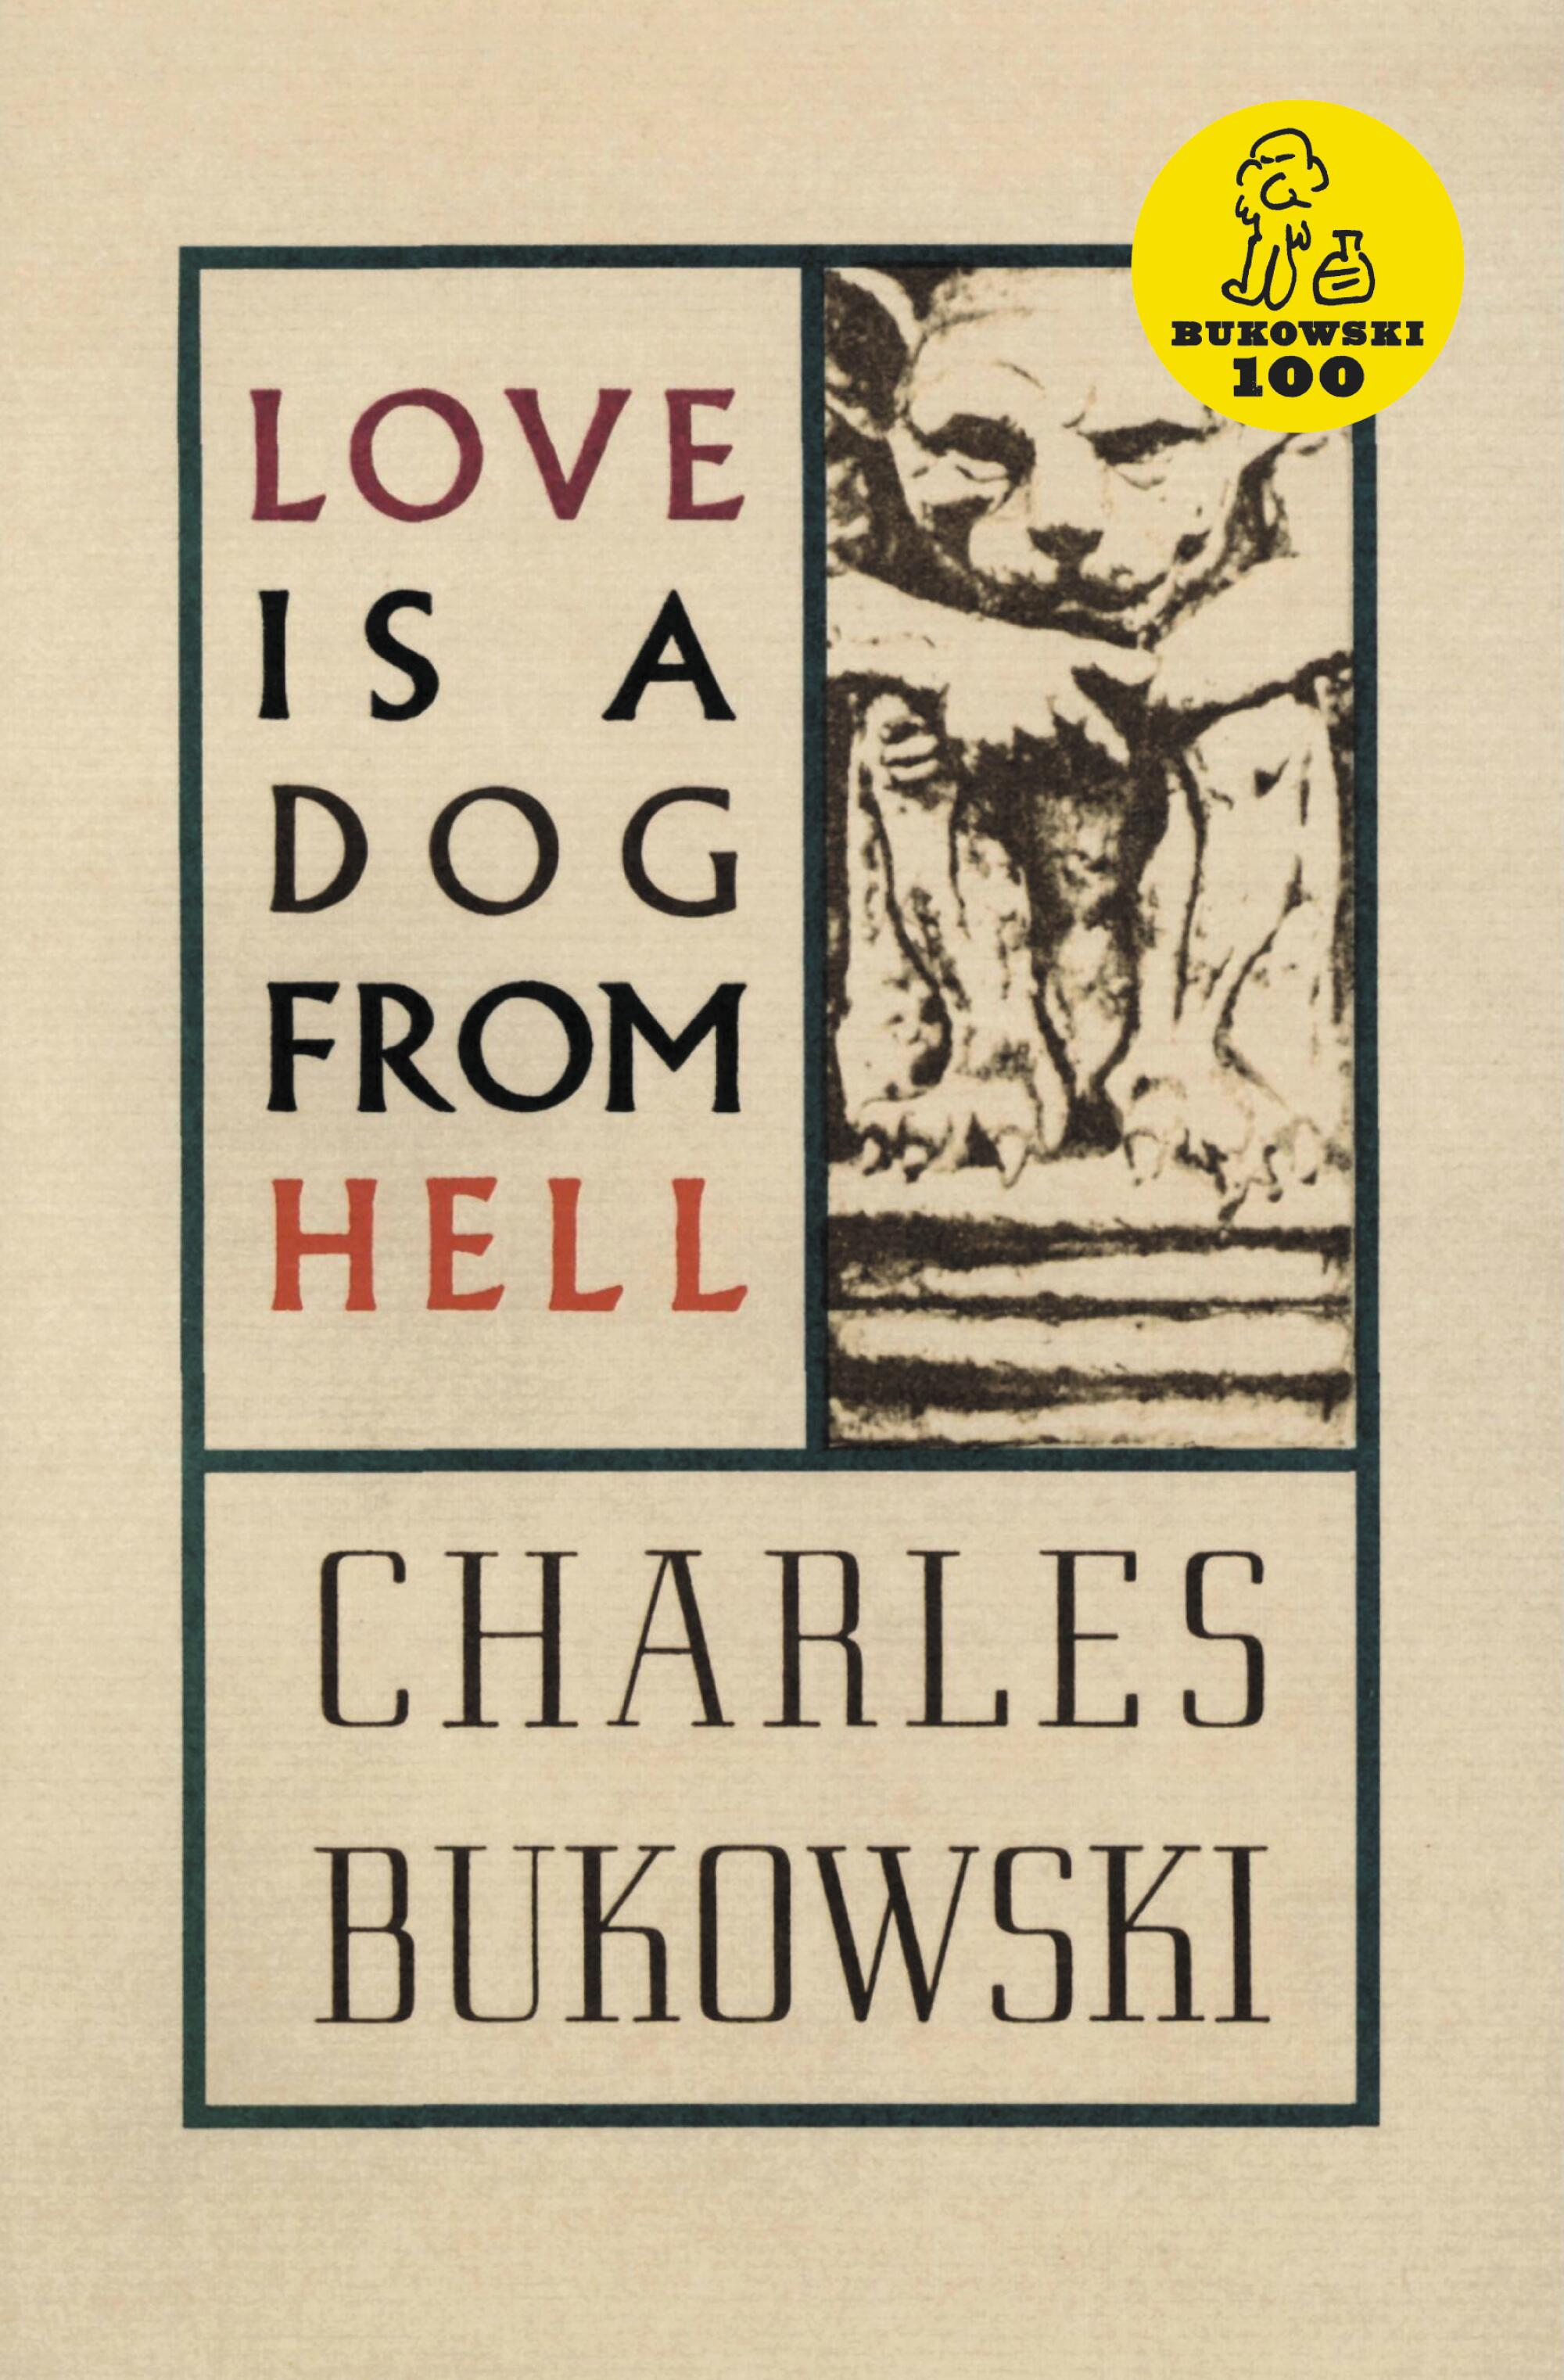 "Love is a Dog From Hell" by Charles Bukowski